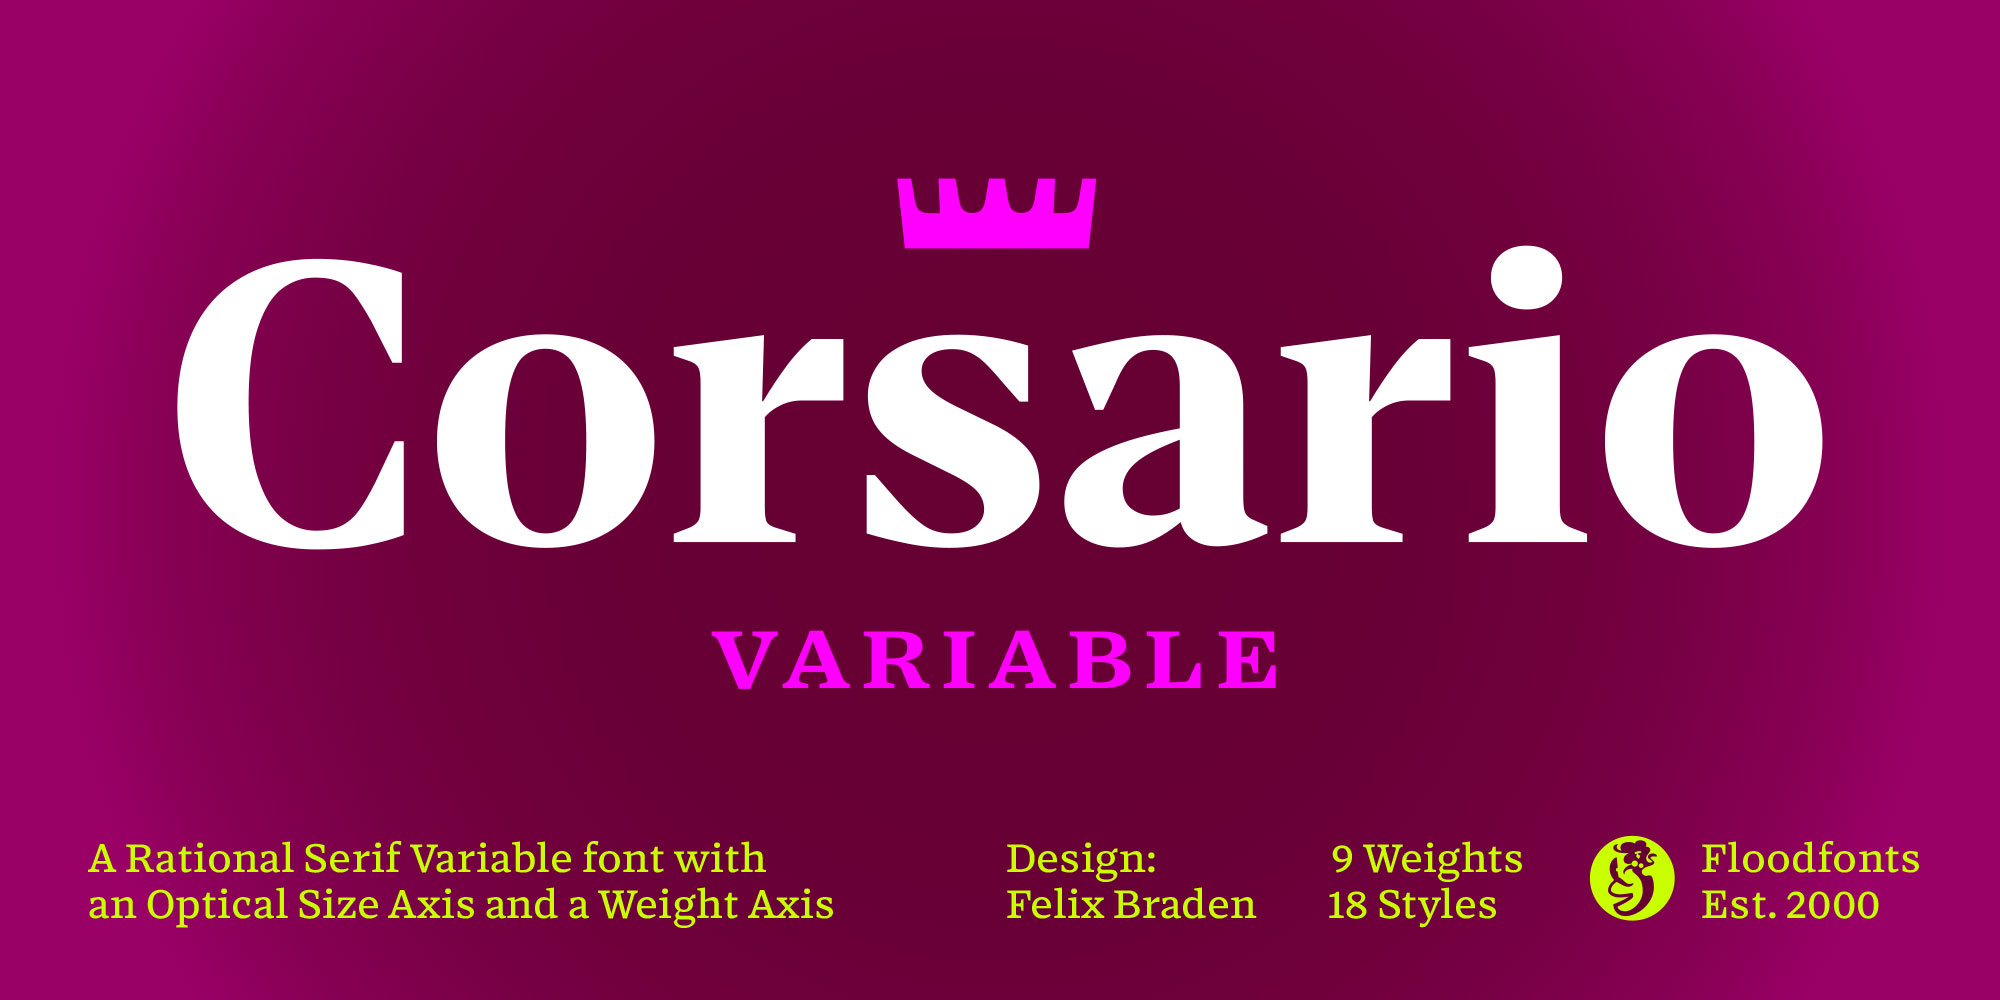 Card displaying Corsario Variable typeface in various styles